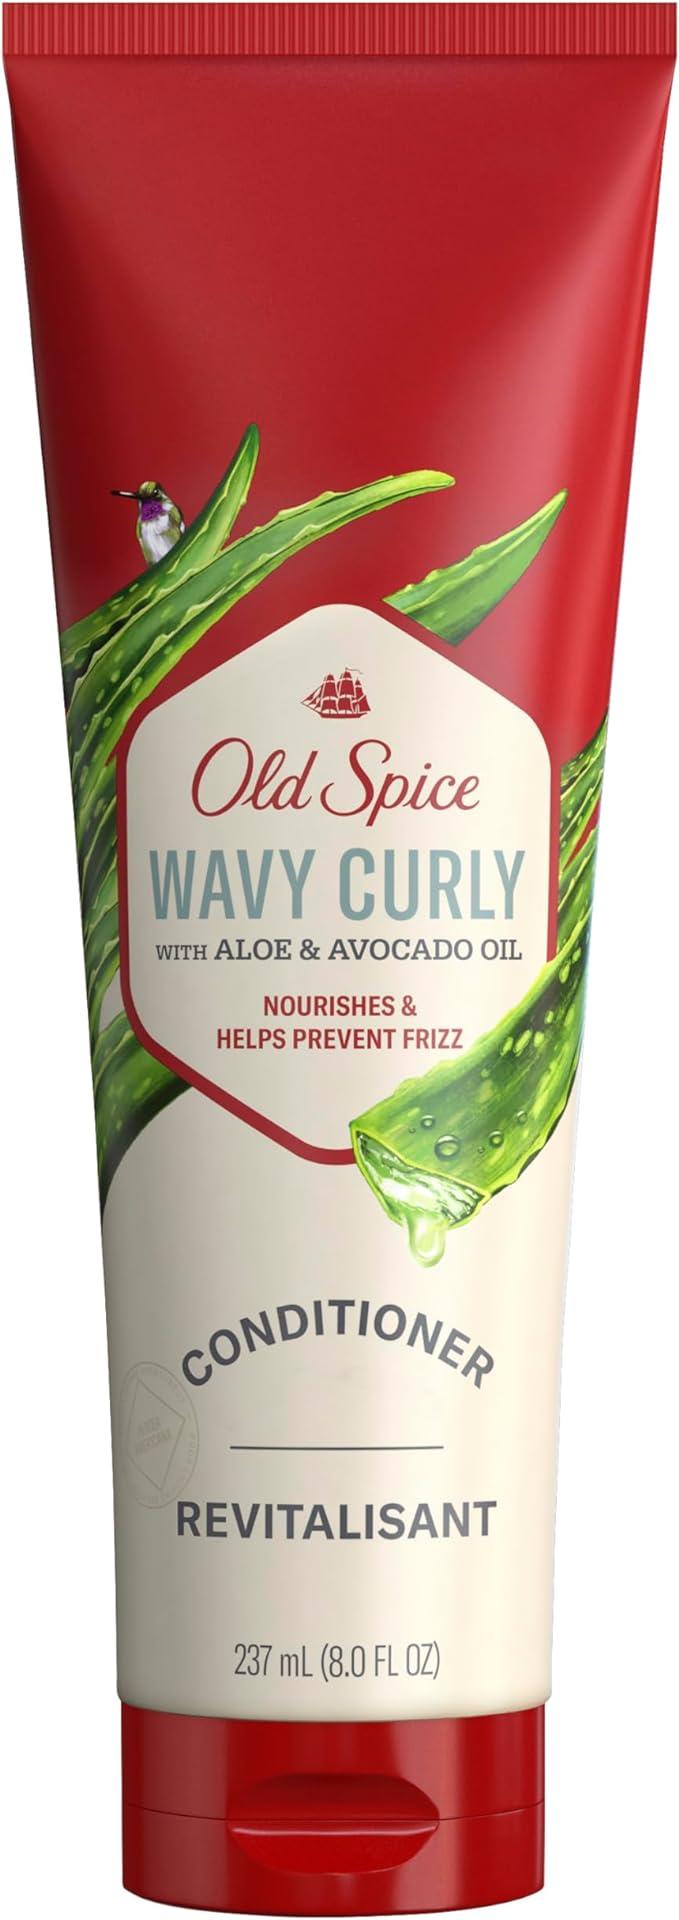 Old Spice Wavy Curly Hair Conditioner With Aloe And Avocado Oil 237 ML